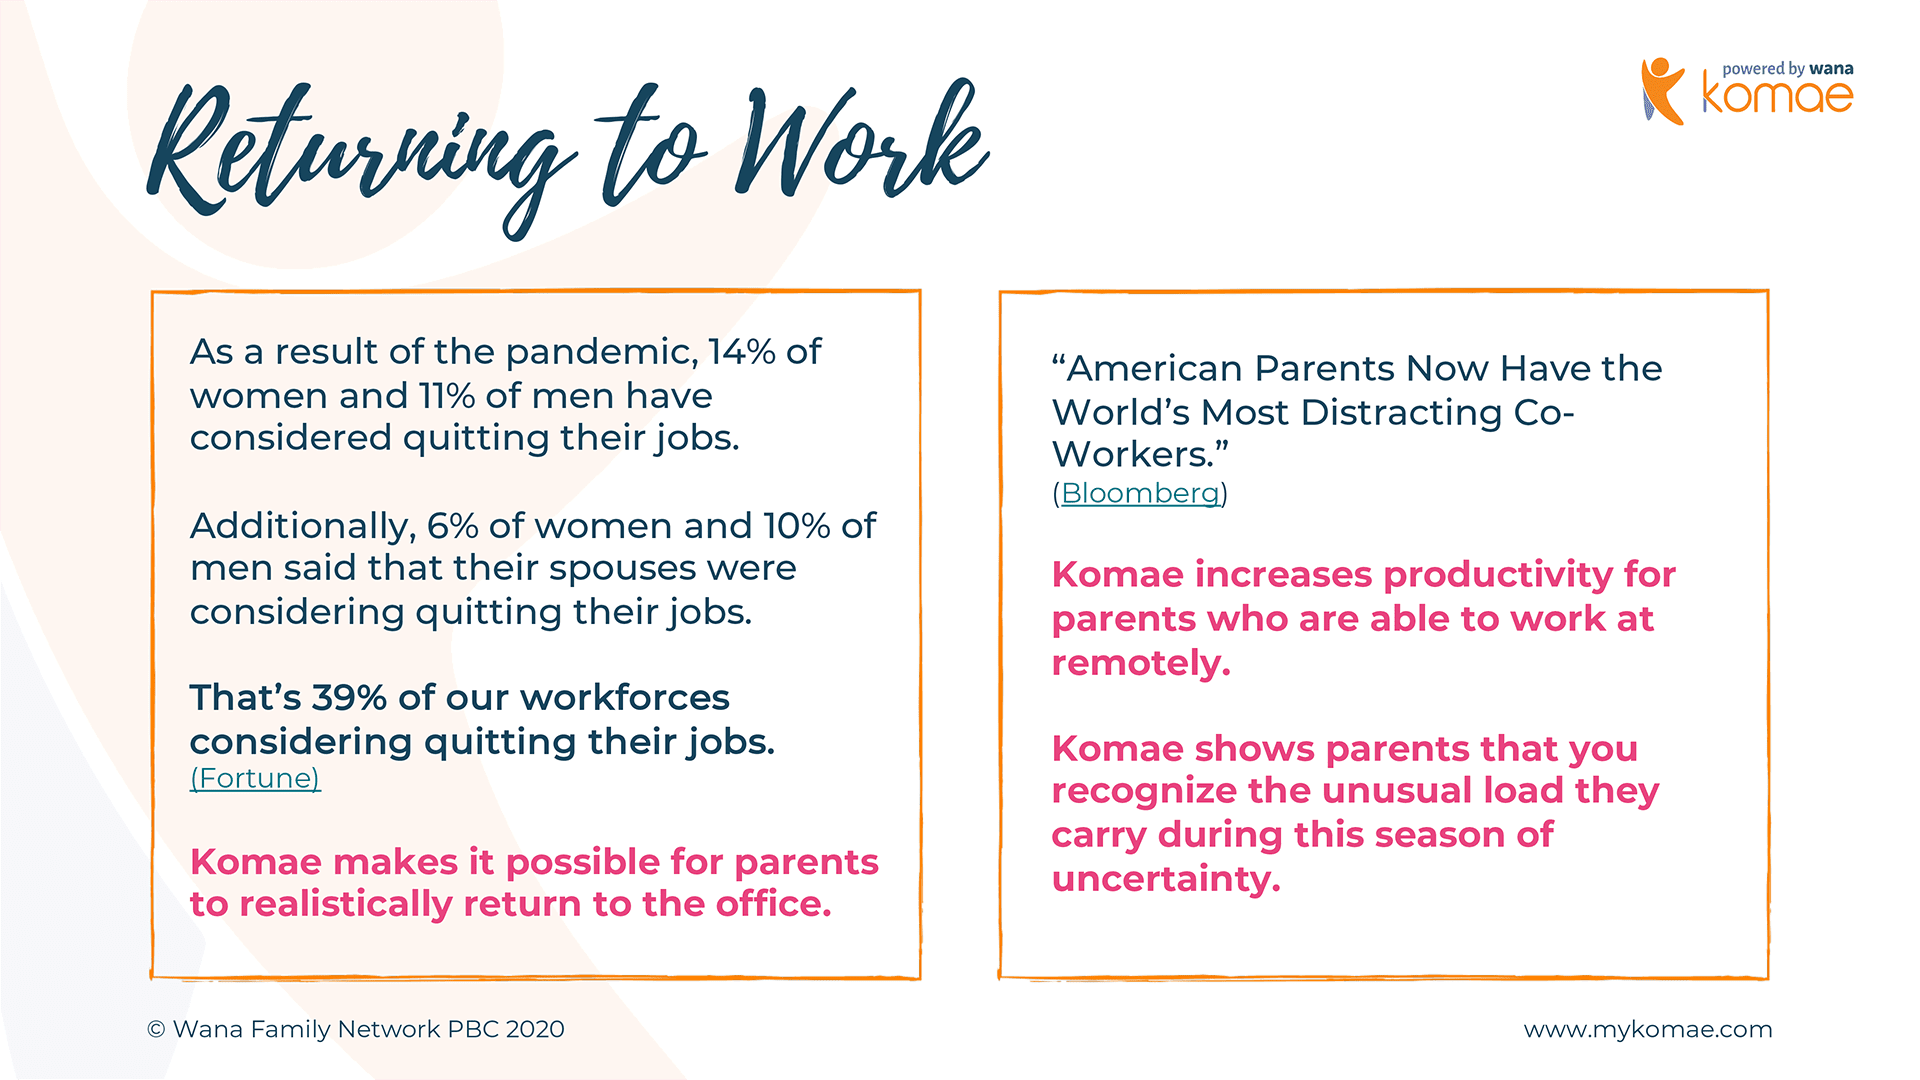 graphic of data showing how Komae can support parents returning to work